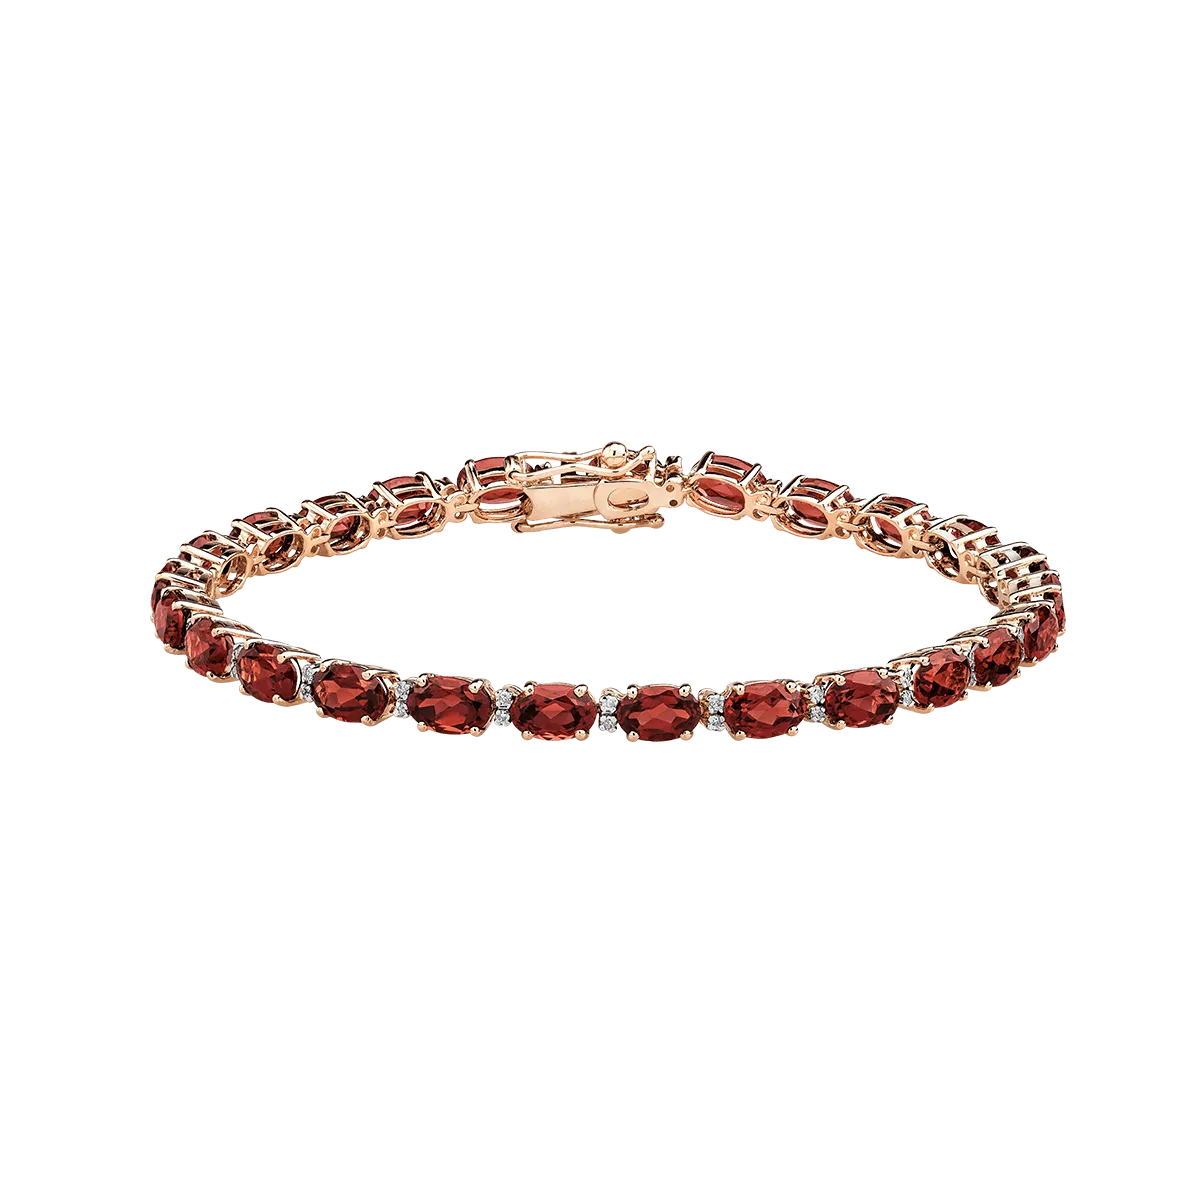 14K yellow gold tennis bracelet with 13.88ct garnets and 0.24ct diamonds